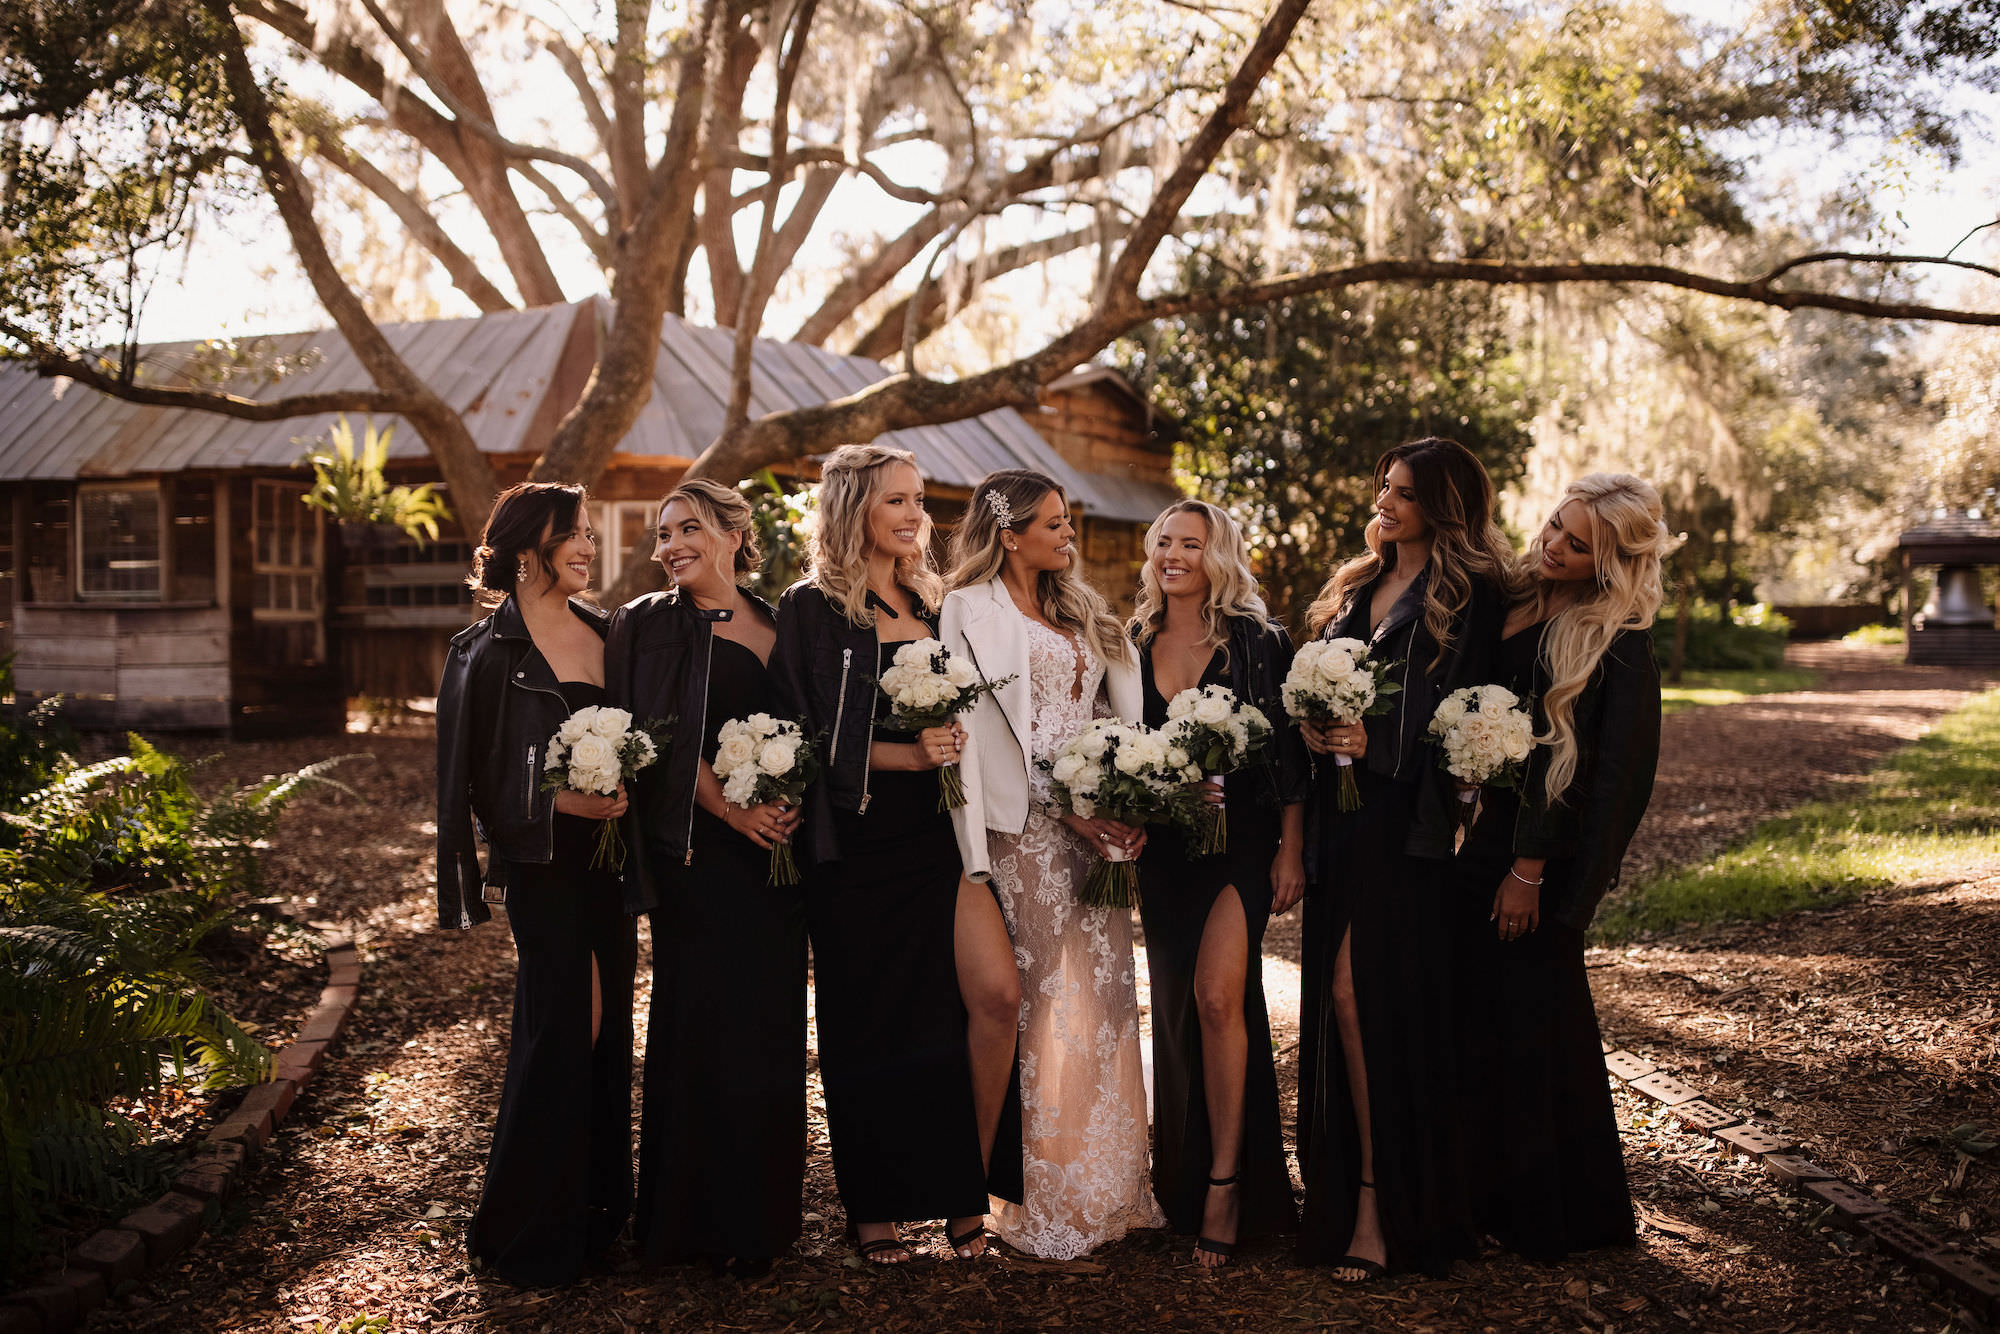 Bride and Bridemaids Leather Jackets | Black and White Wedding Inspiration